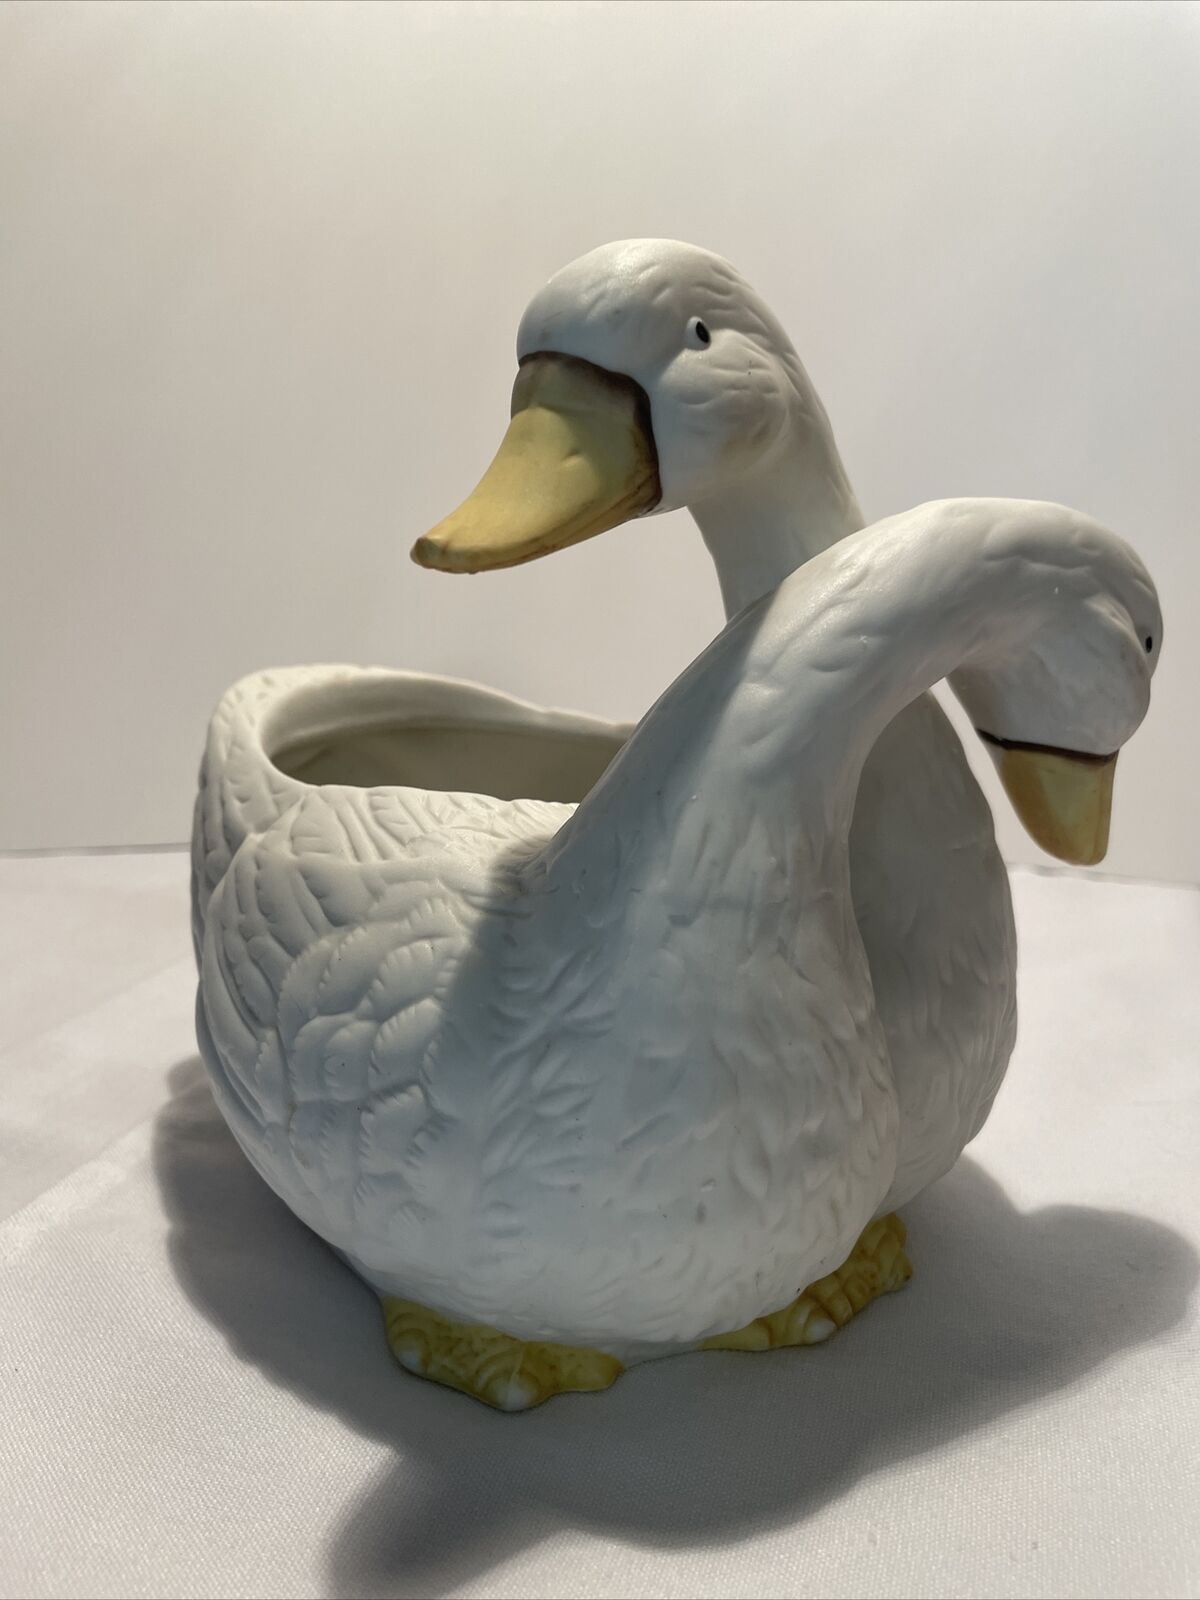 Adorable Vintage Ceramic Planter Two Entwined White Geese Hugging Ducks Mexico